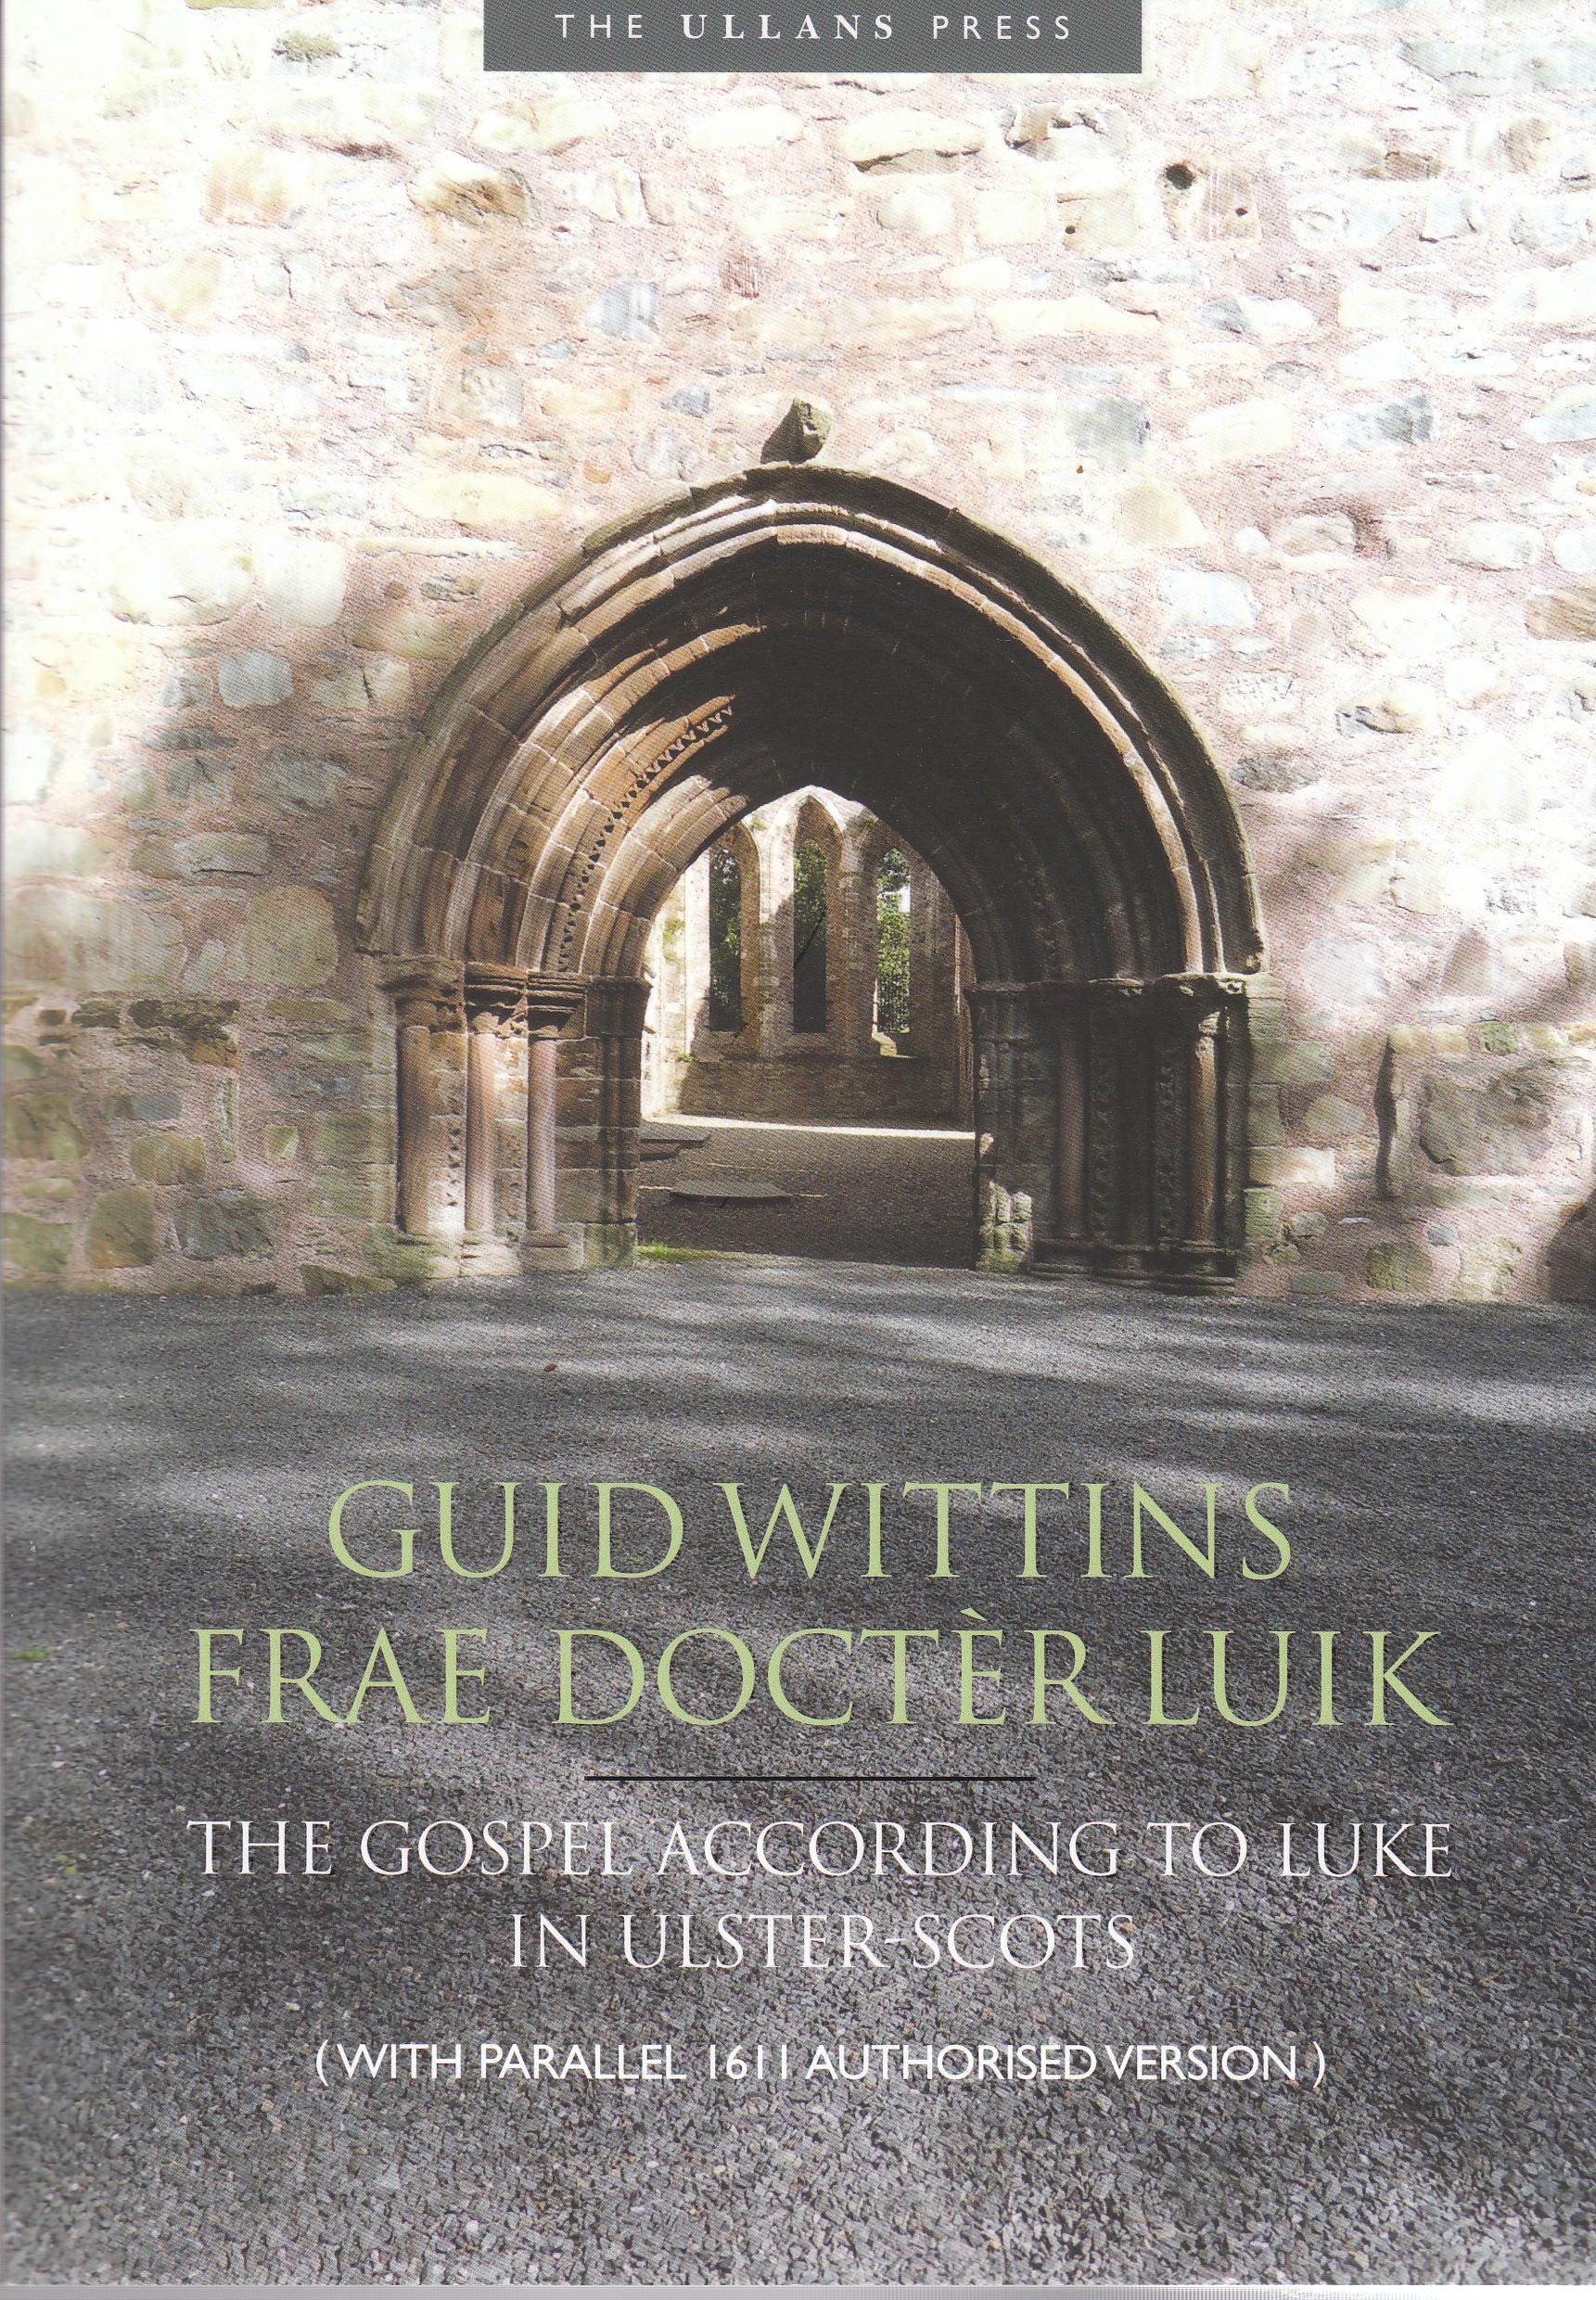 Wittens frae Docter Luik: The Gospel according to Luke in Ulster-Scots (with parallel 1611 Authorised Version)